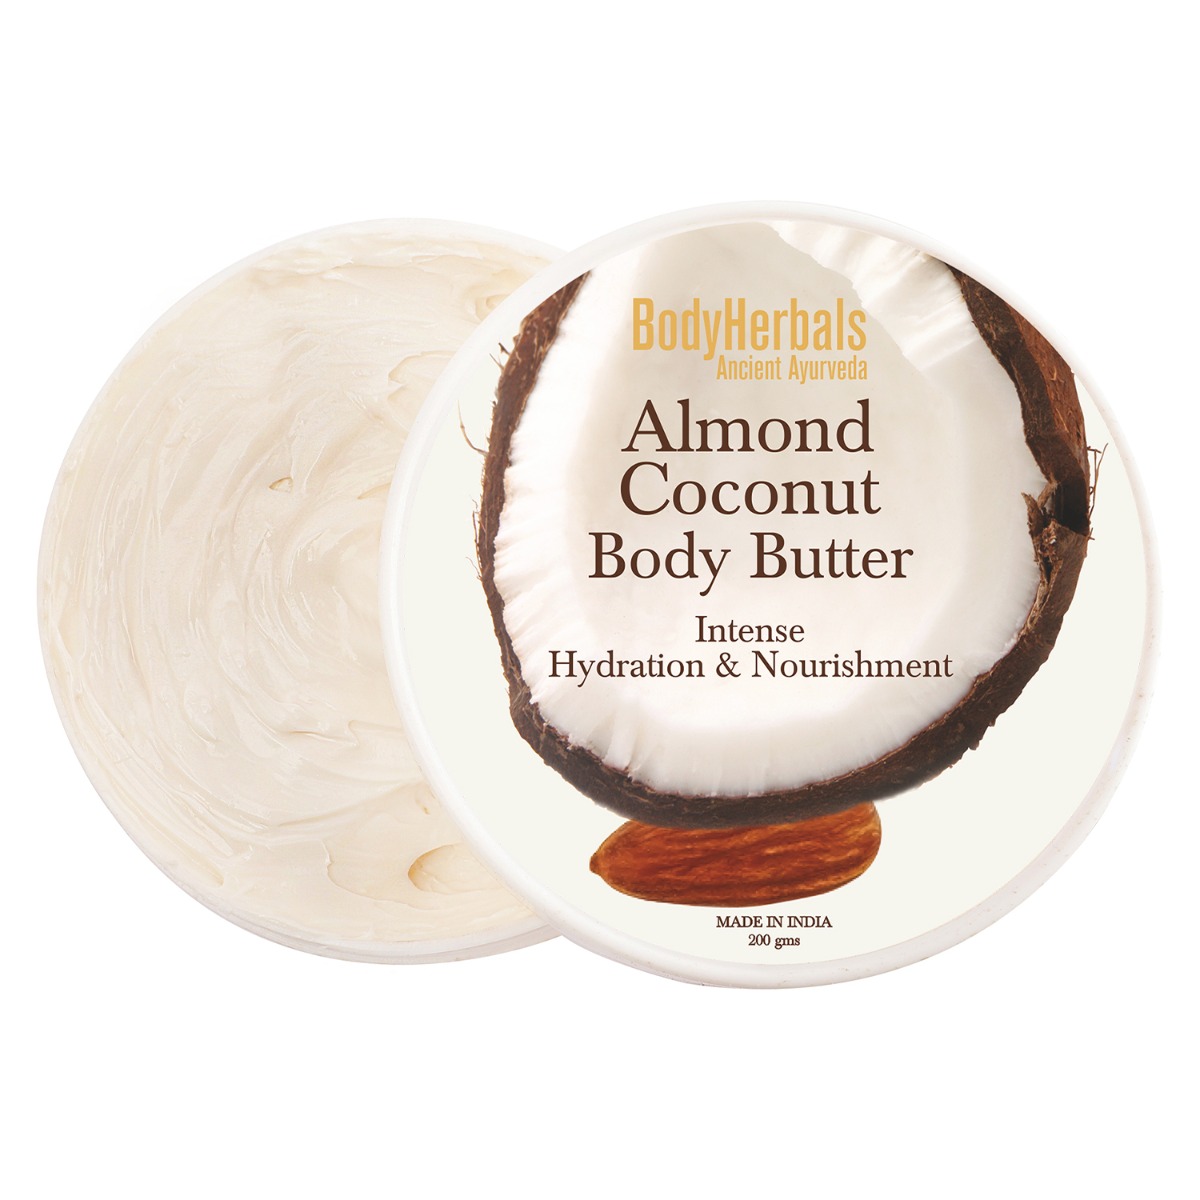 BodyHerbals Almond Coconut Body Butter Intense Hydration And Nourishment, 200gm